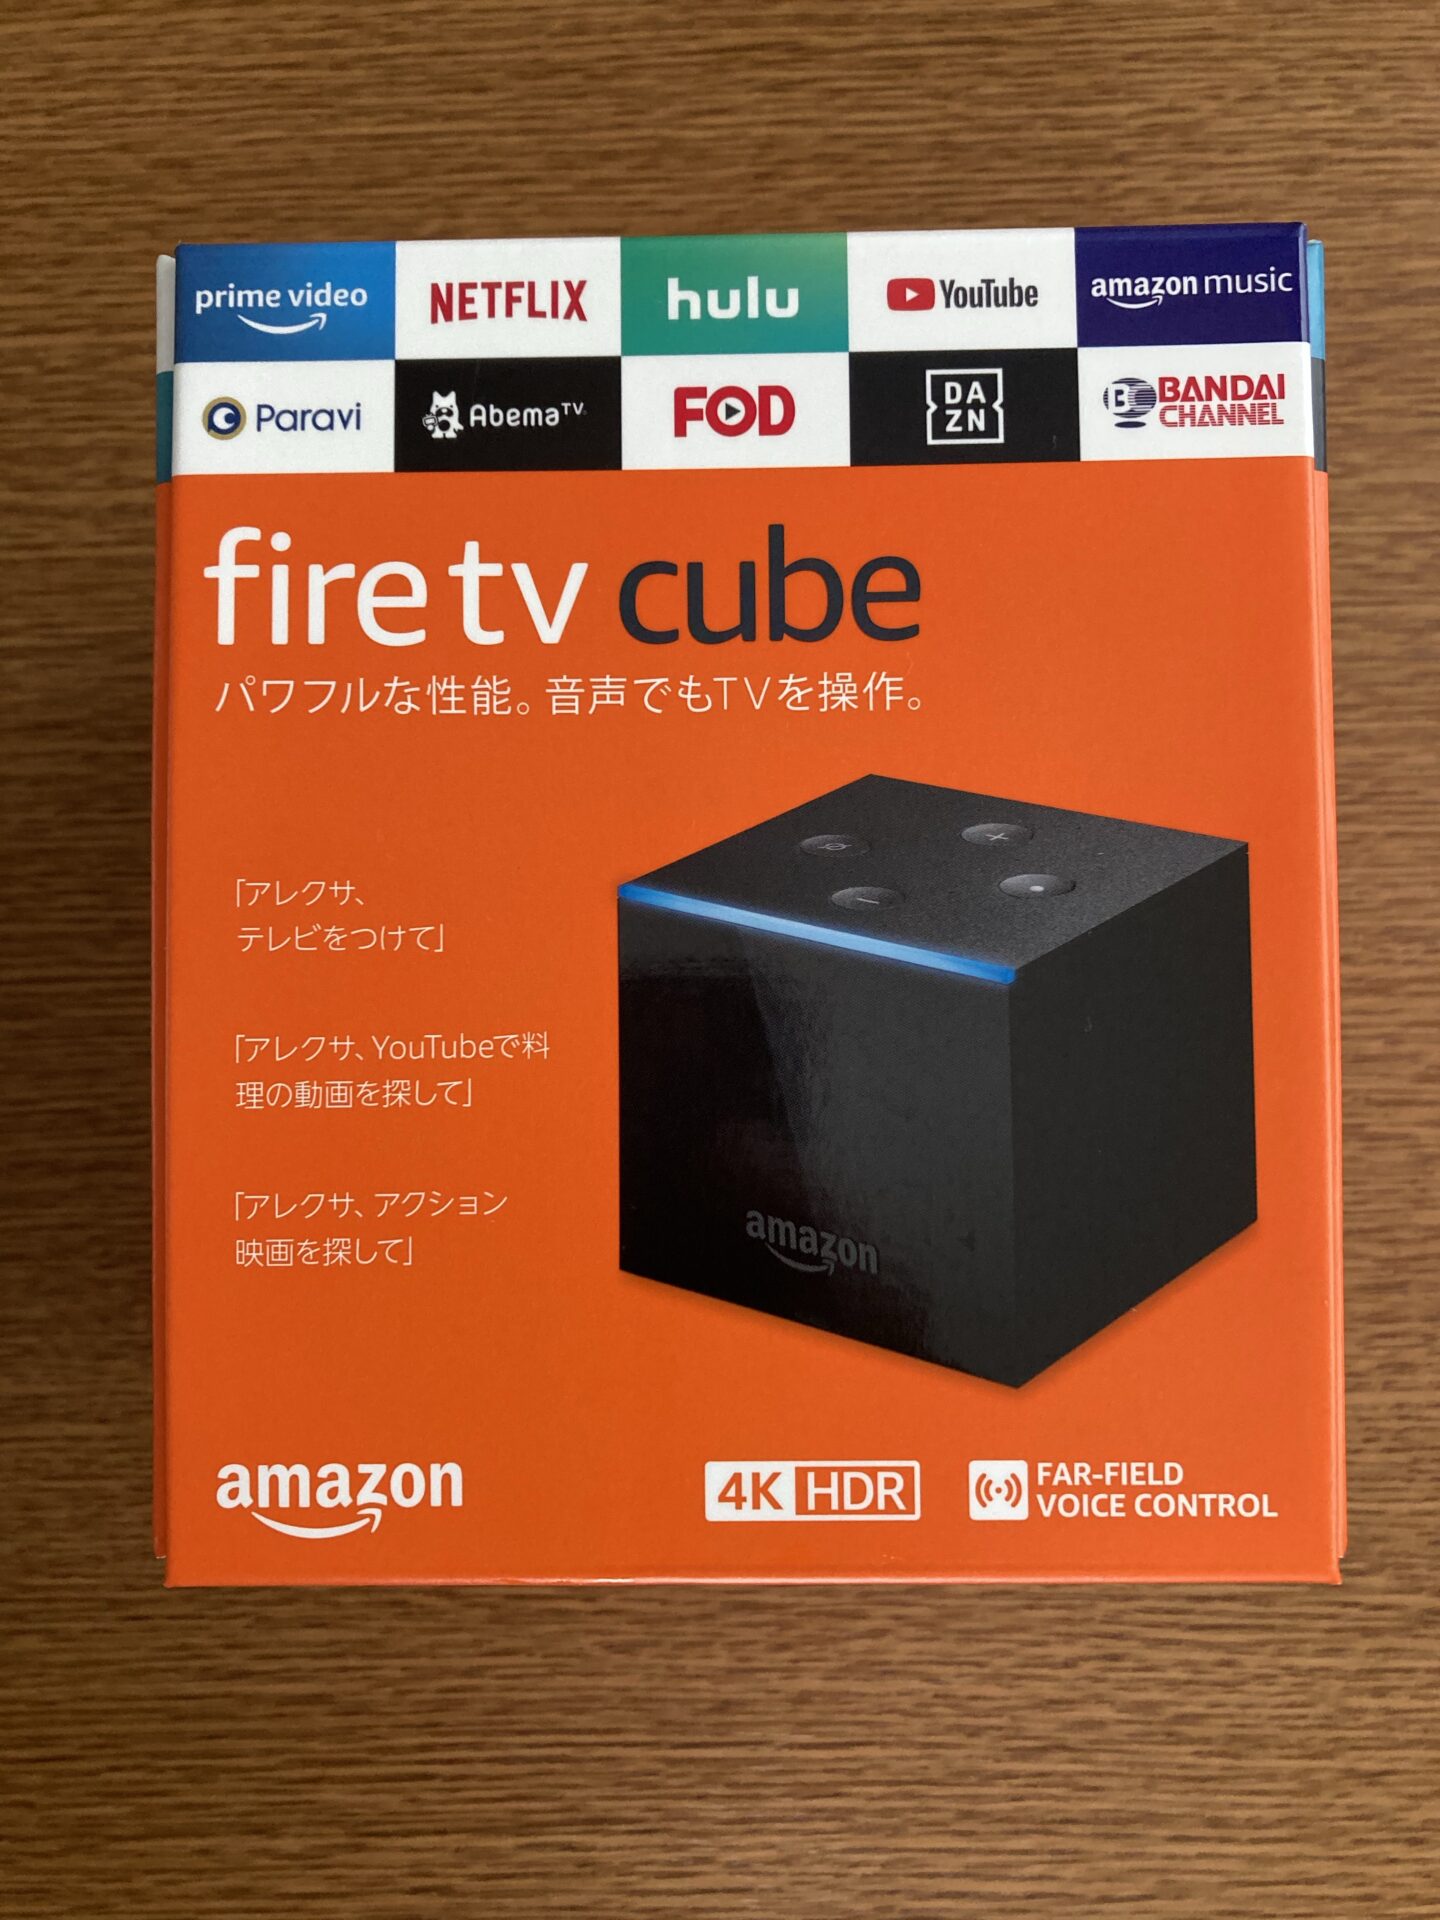 amazon-fire-tv-cube-package-front